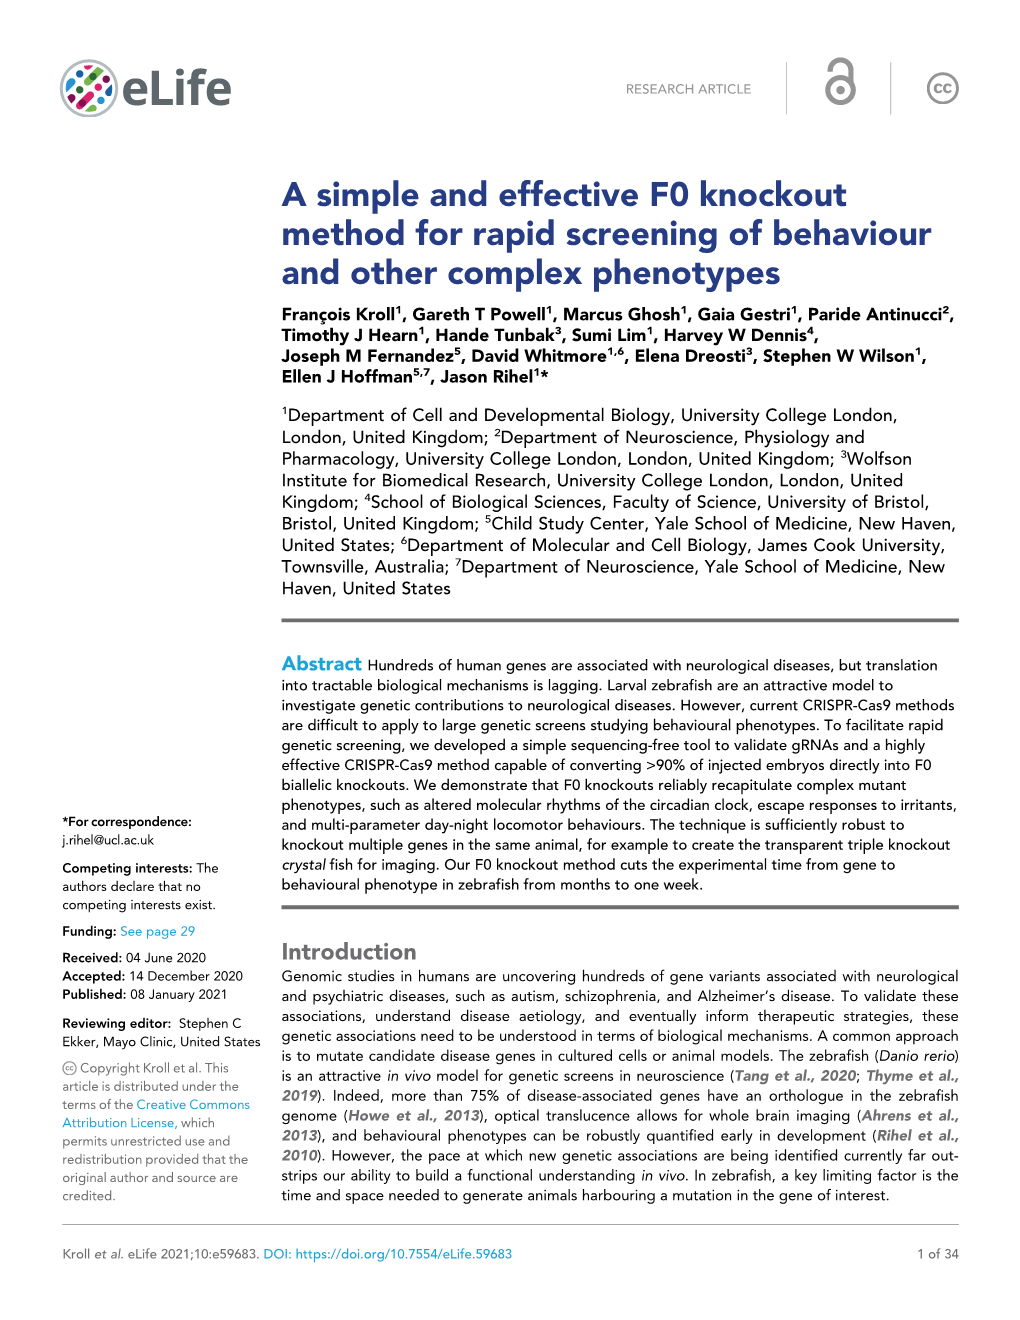 A Simple and Effective F0 Knockout Method for Rapid Screening